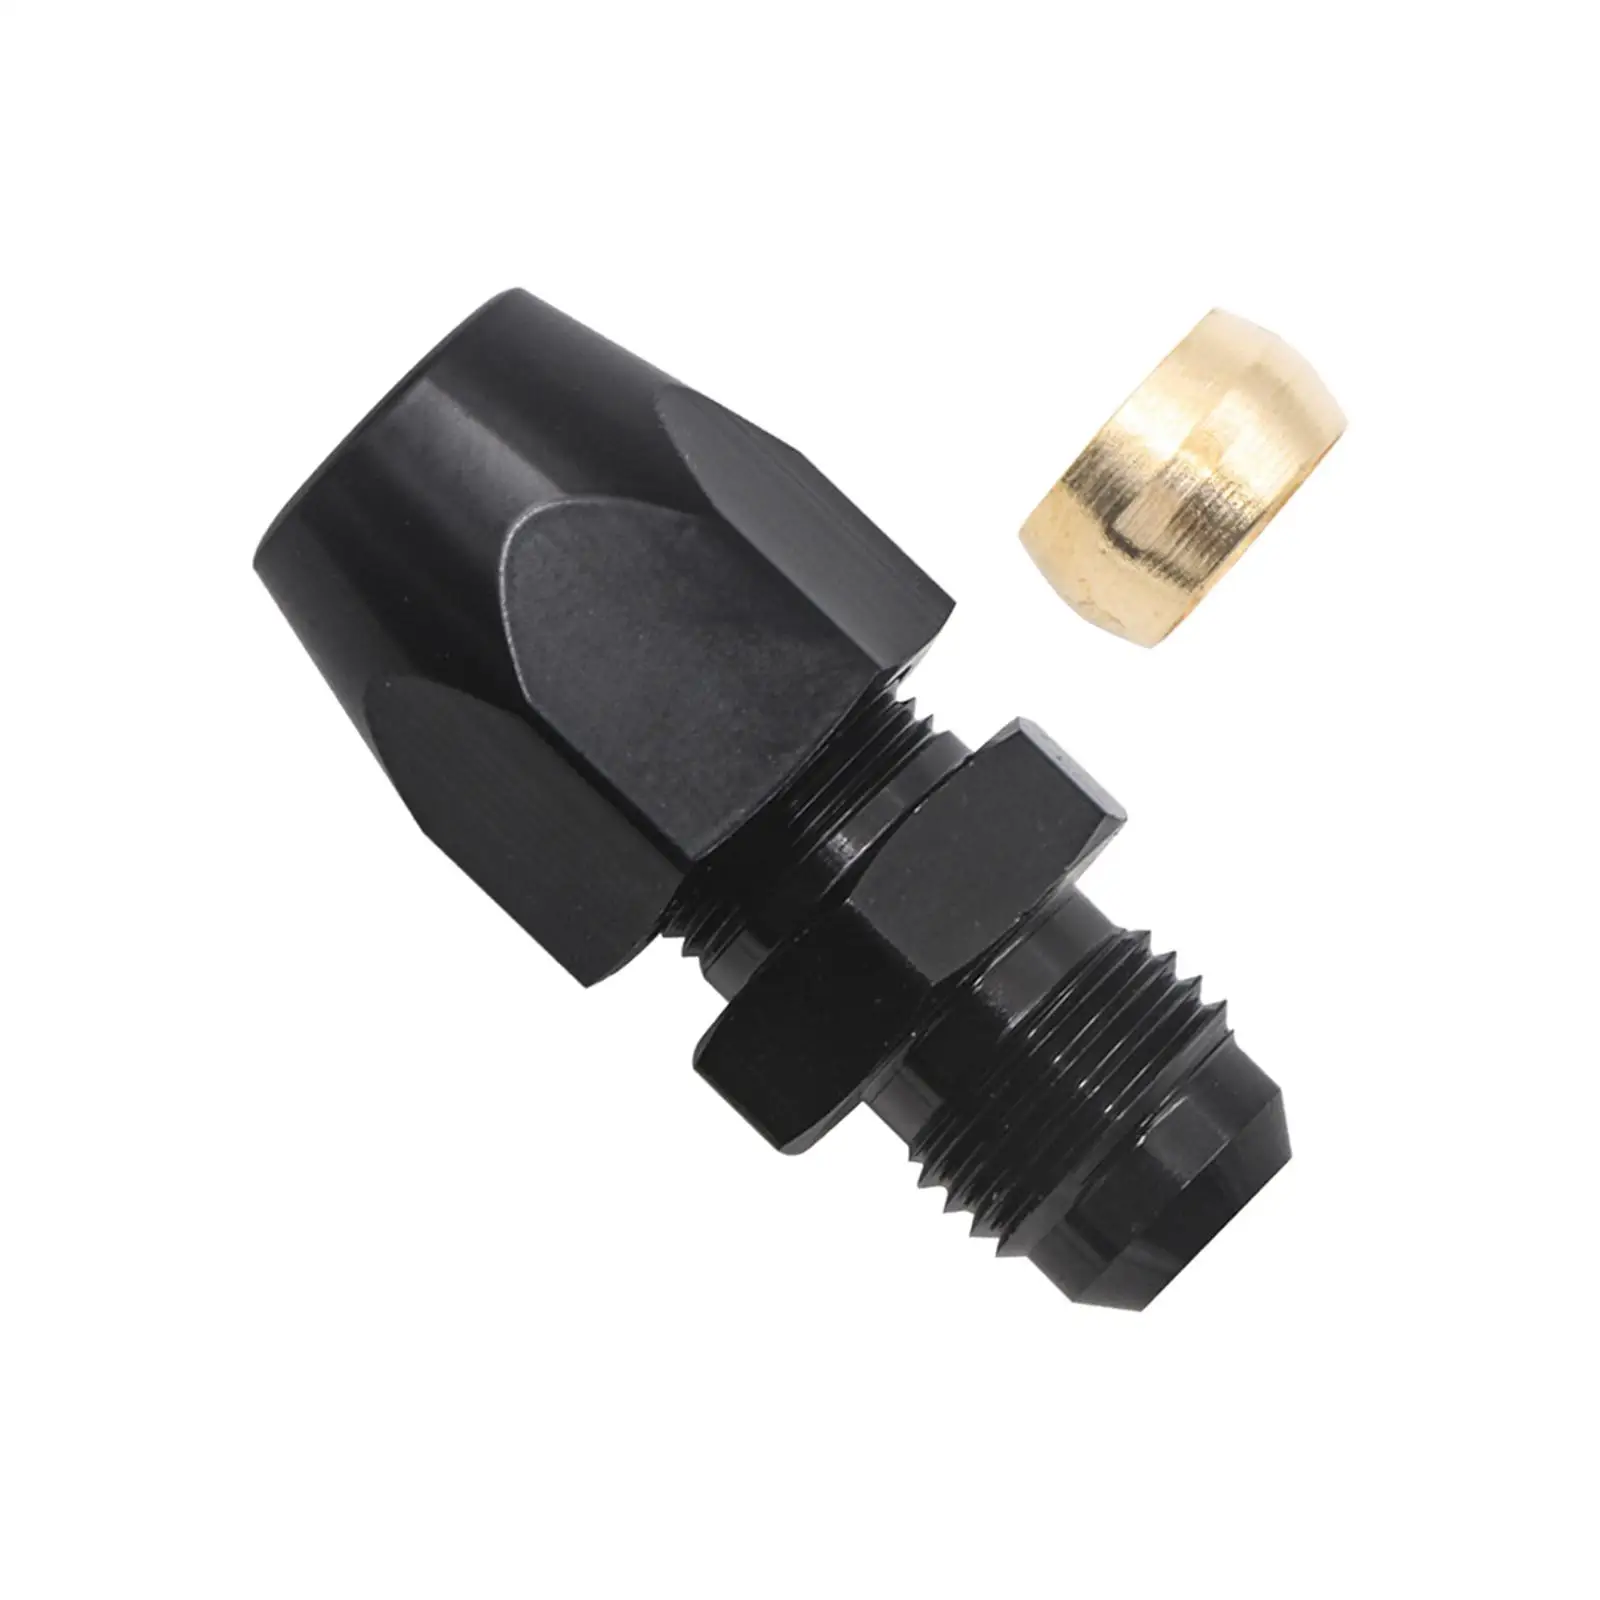 Fuel Adapter Fitting 6 AN to 3/8 inch Aluminum Alloy Fittings and Brass Ferrules Tubing Adapter for Air and Fuel Delivery